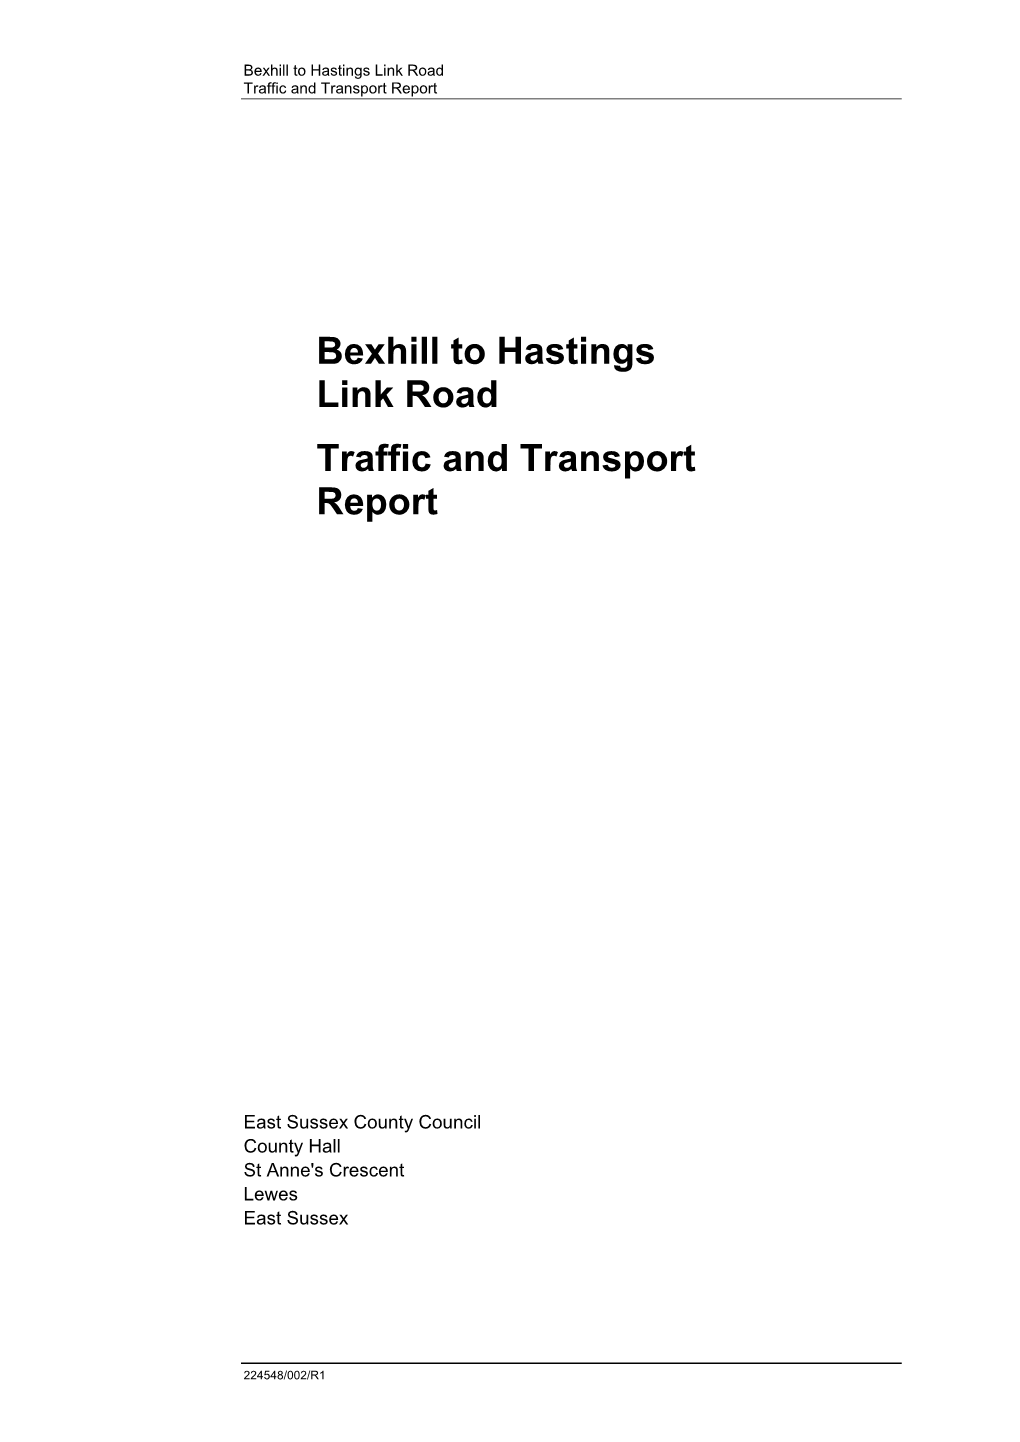 Bexhill to Hastings Link Road Traffic and Transport Report